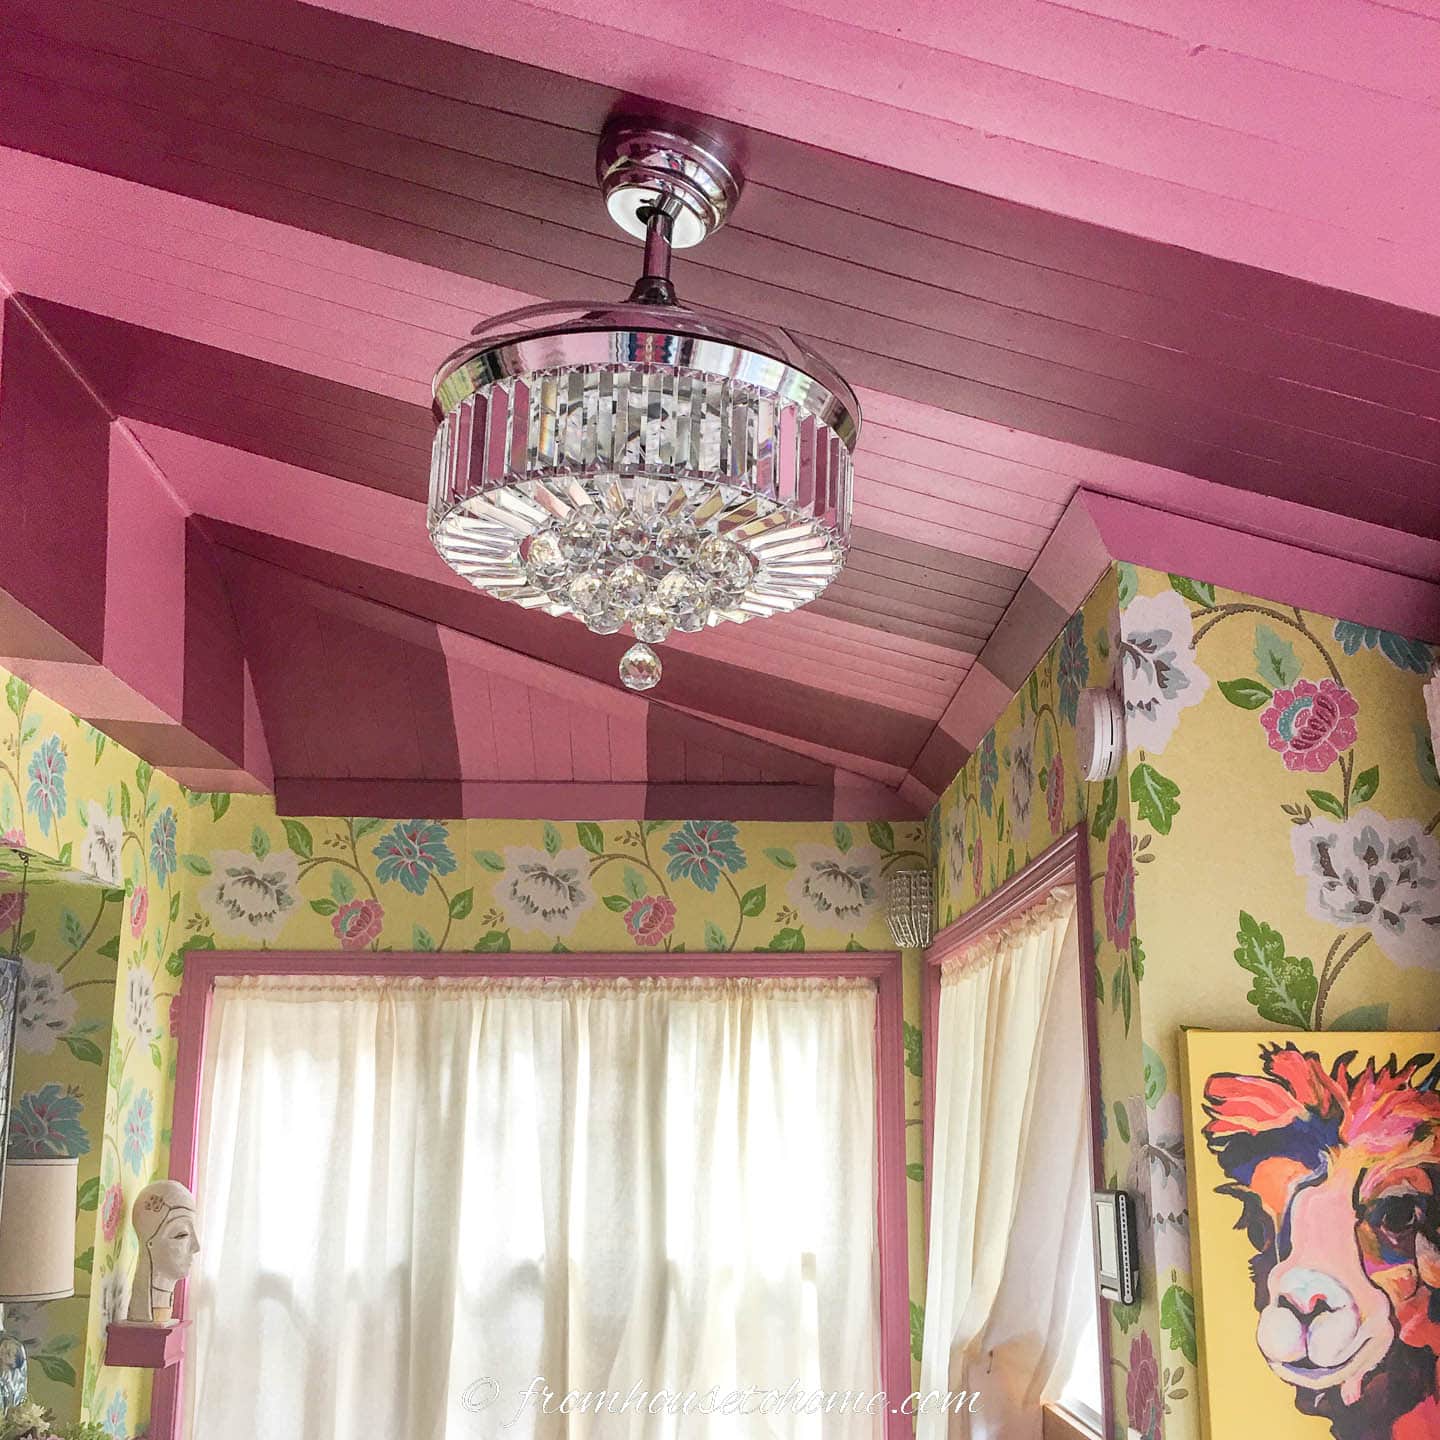 Crystal light fixture with a retractable fan in a colorful room